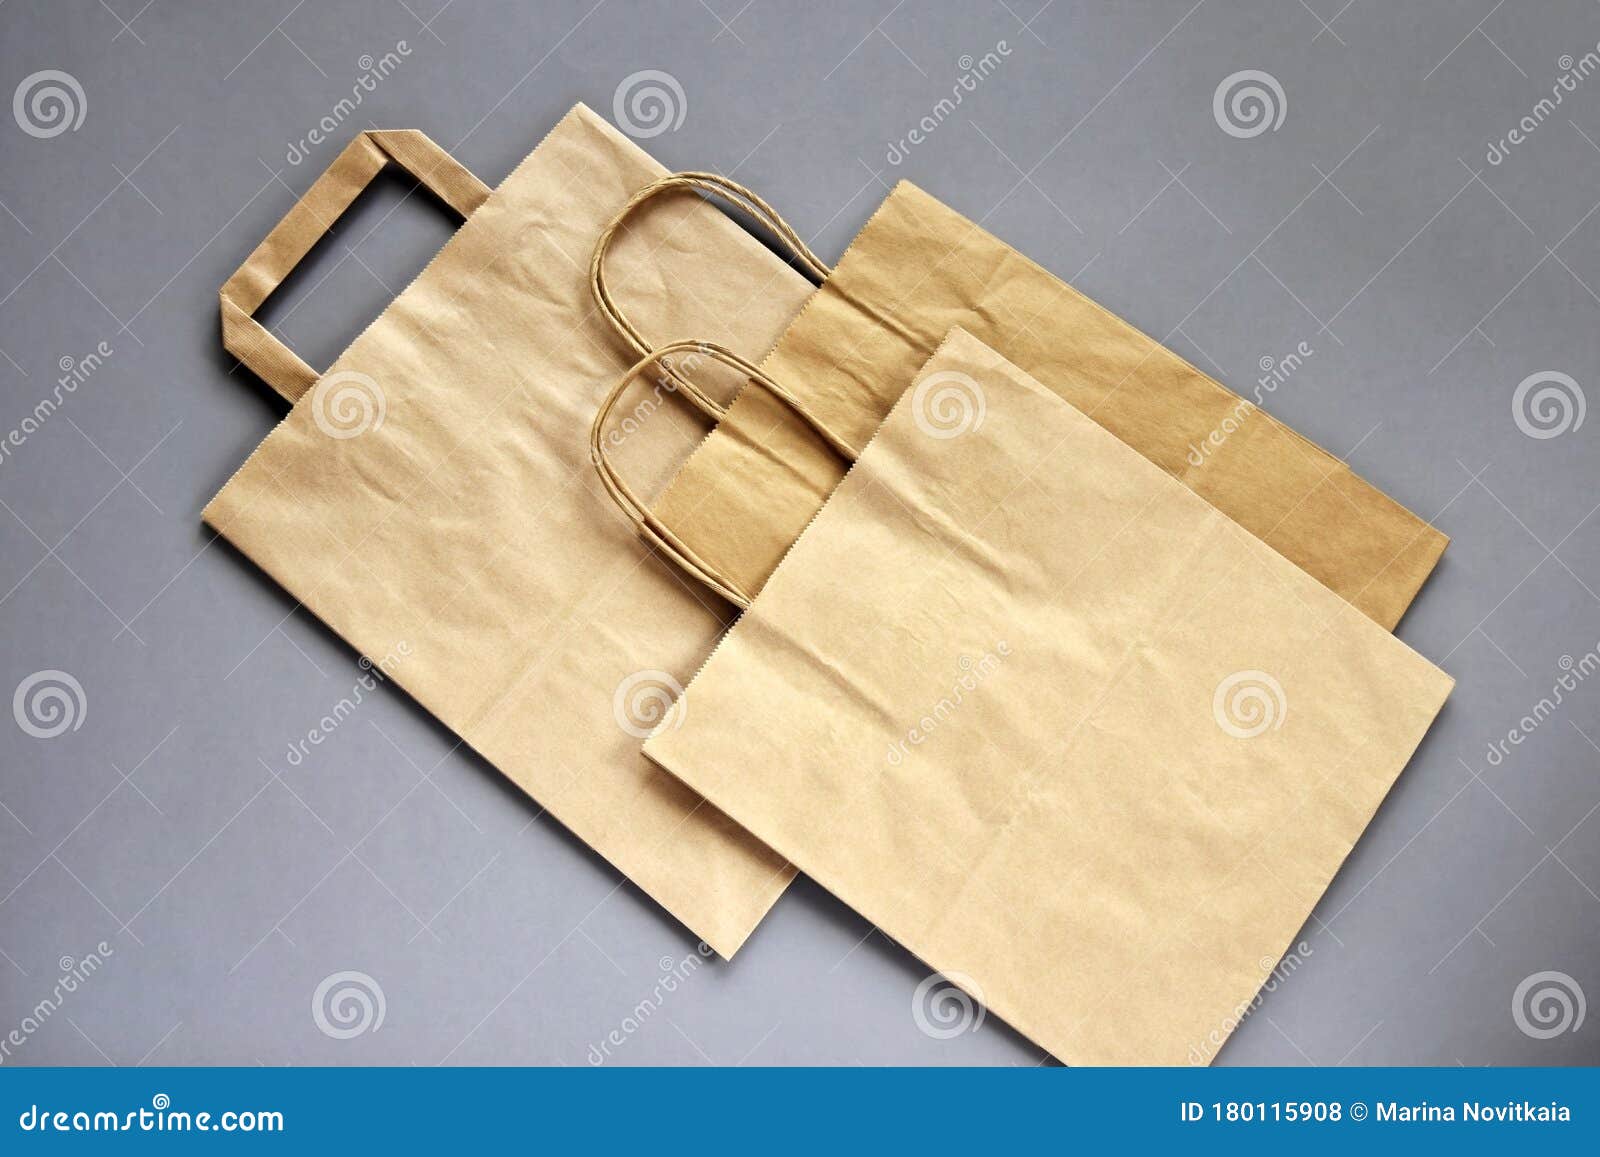 Download Three Empty Brown Shopping Bags With Handles On Gray ...